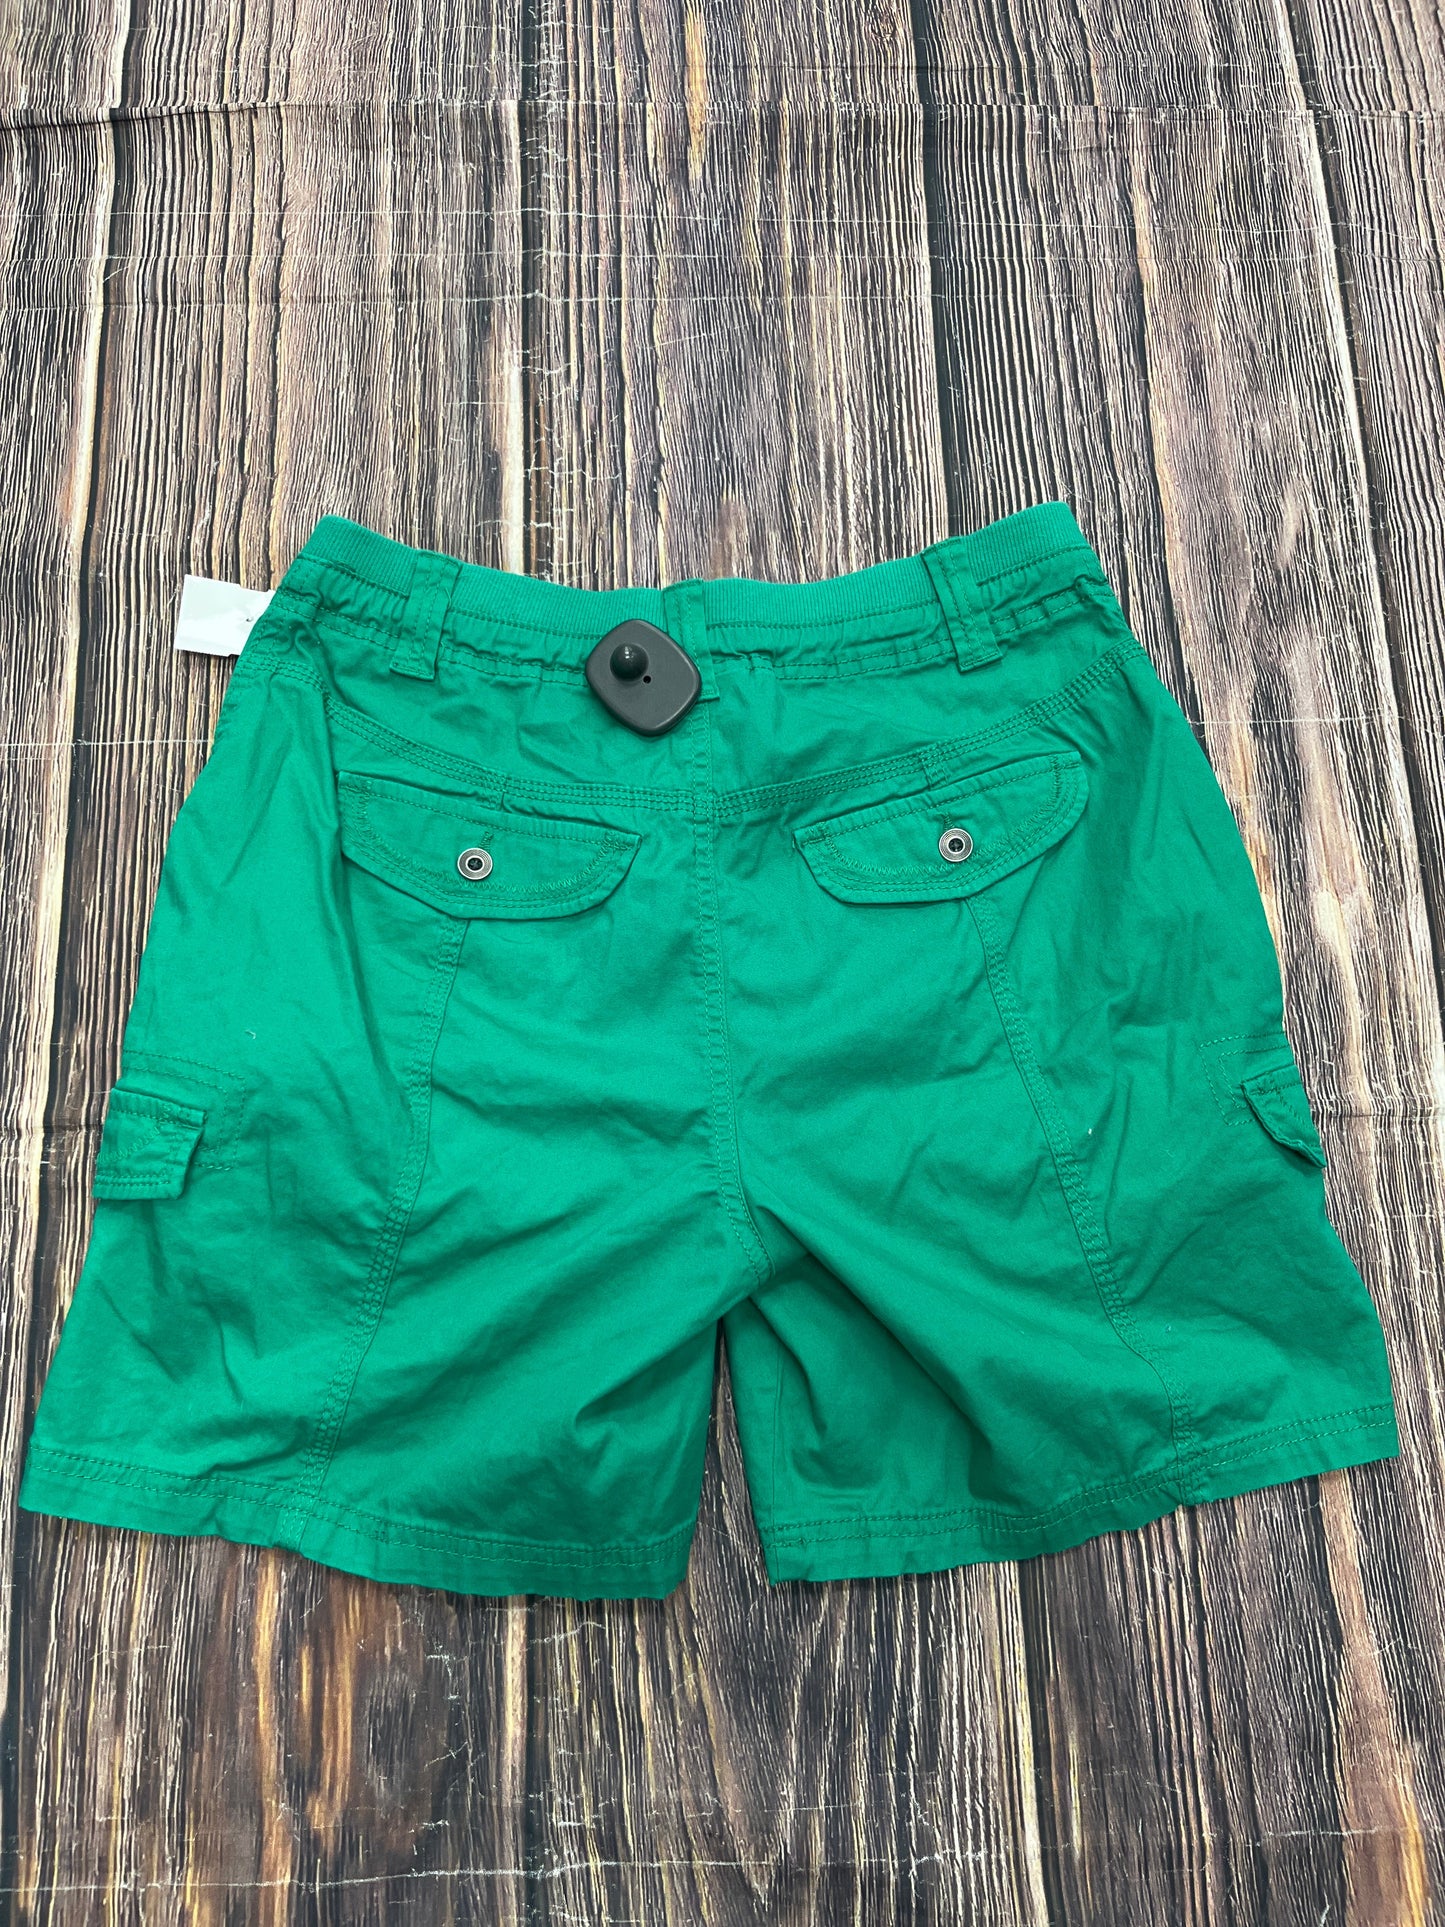 Green Shorts Style And Company, Size 6